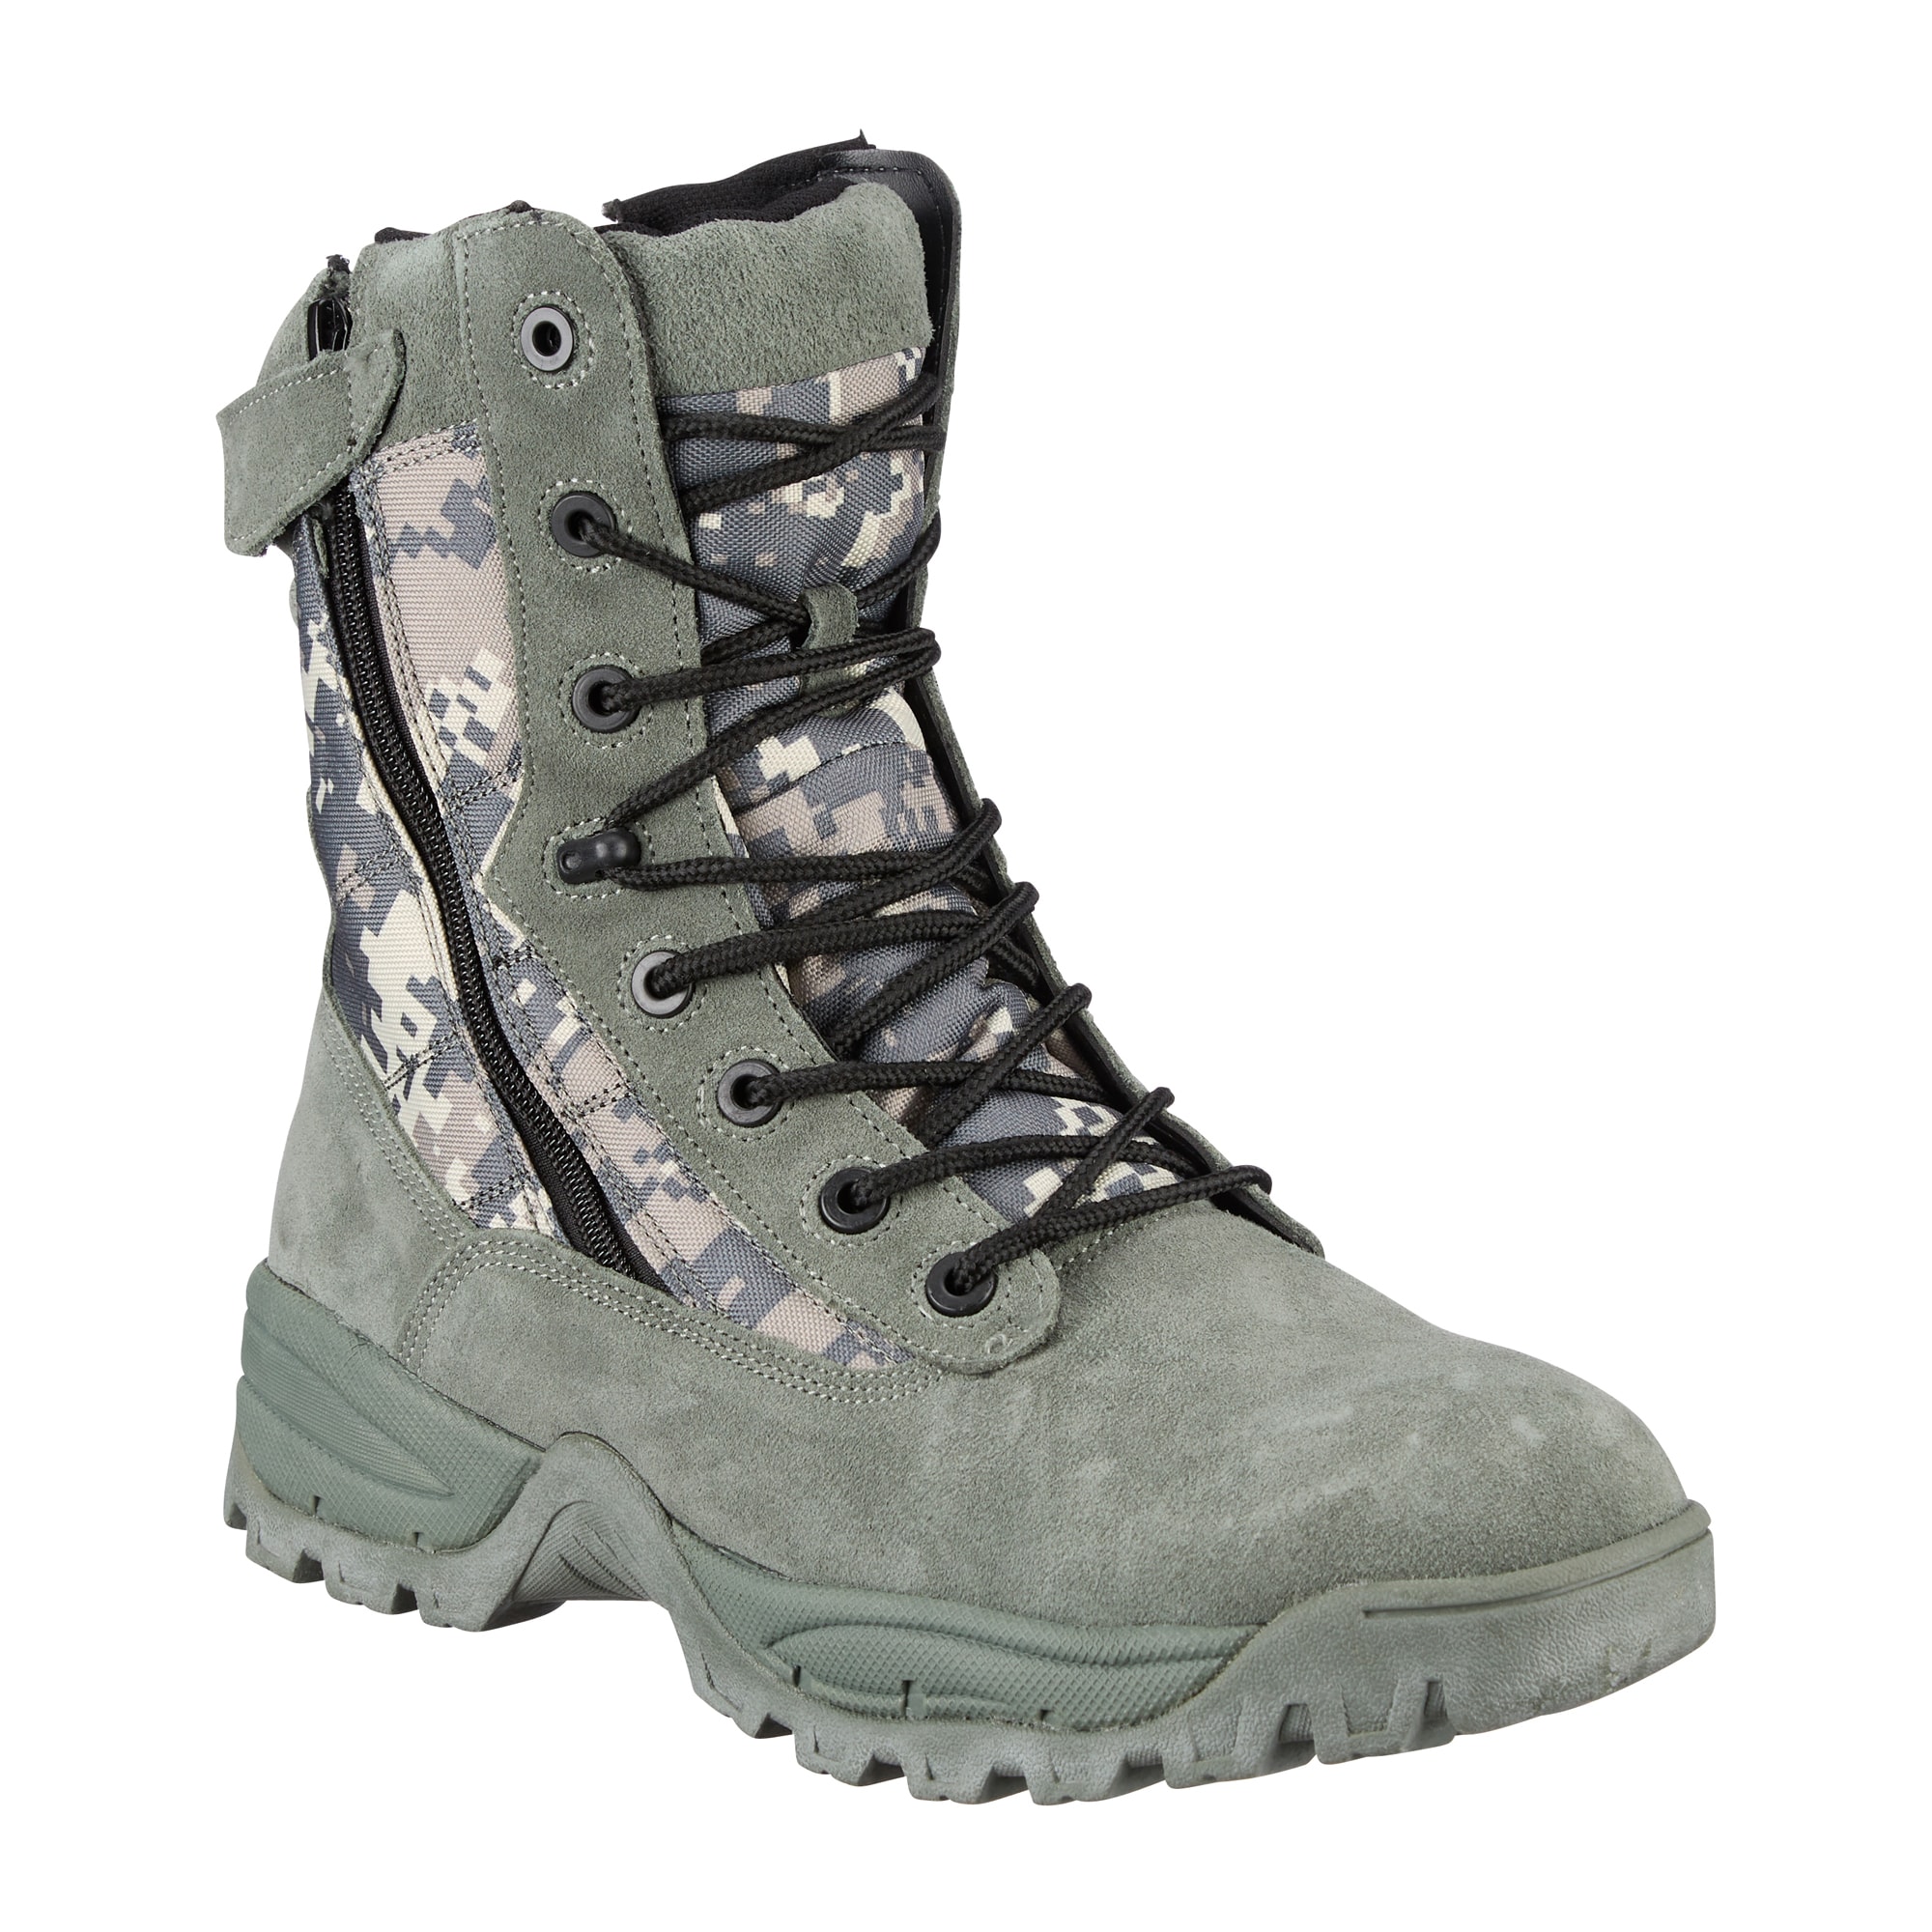 Purchase the Mil-Tec Tactical Boots Two-Zip AT-digital by ASMC